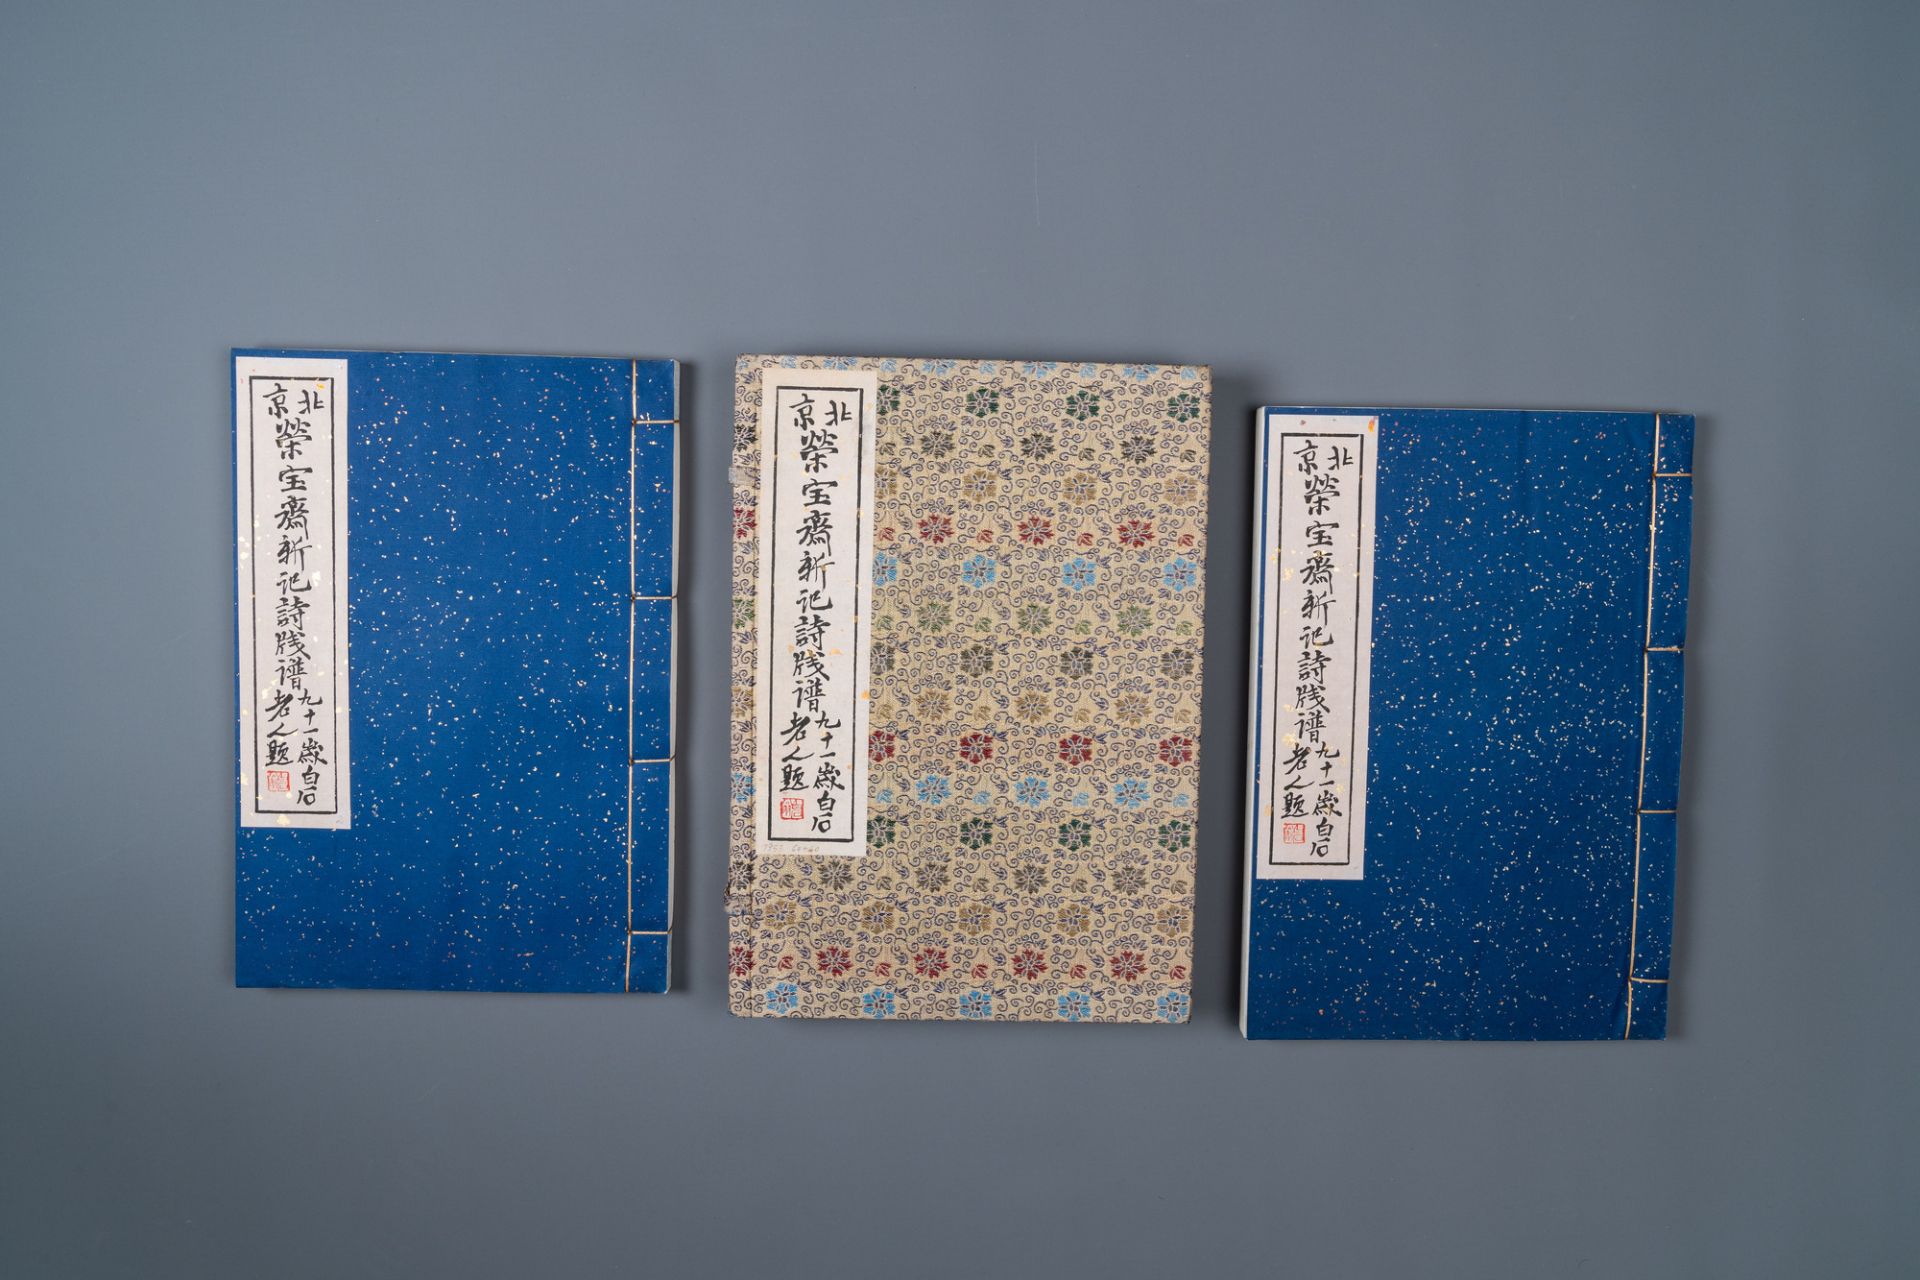 A box with two albums containing 120 woodblocks, 44 of which after Qi Baishi, Rong Bao Zhai studio, - Image 3 of 16